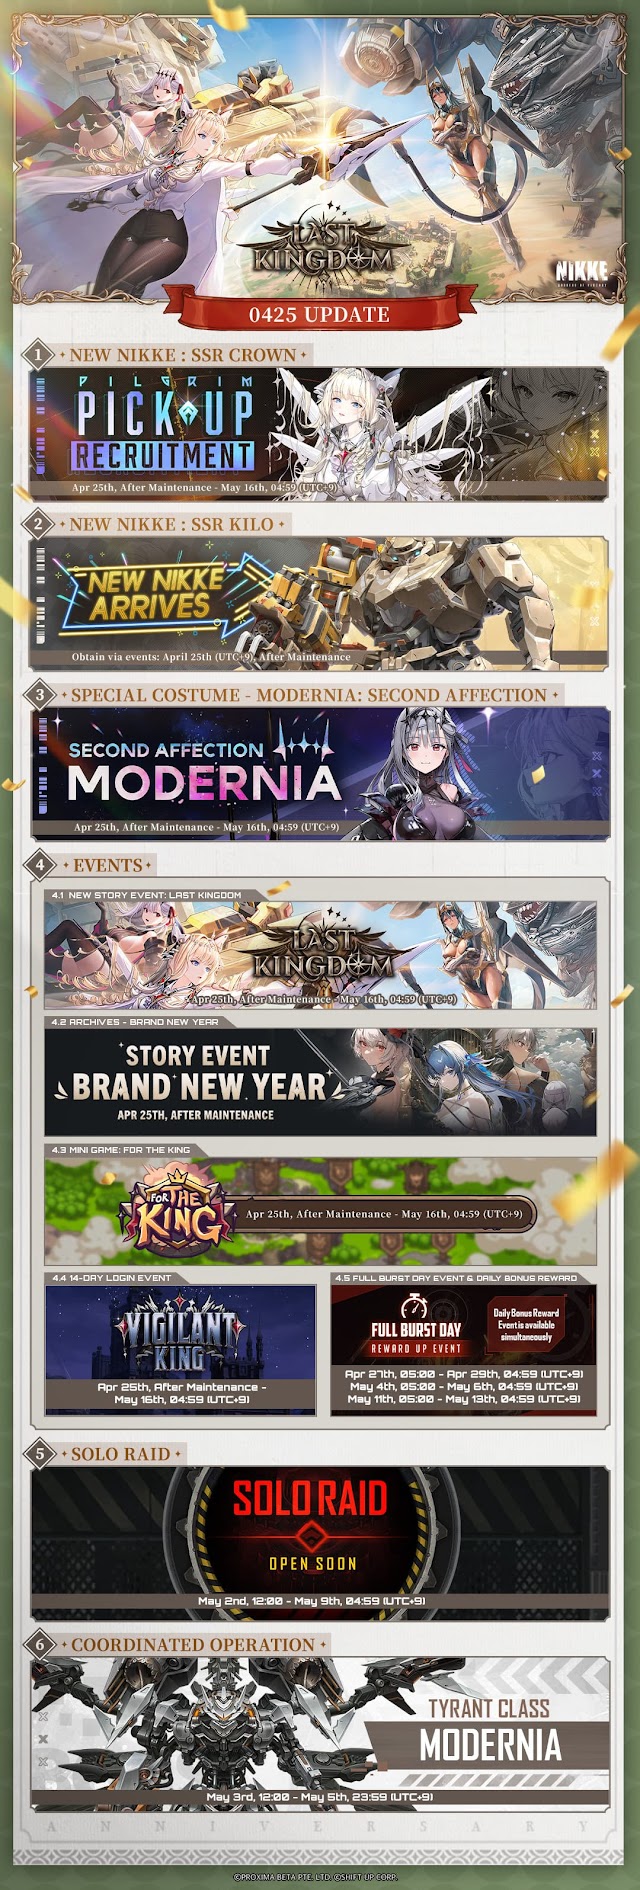 NIKKE 1.5 Anniversary Update: SSR Crown, SSR Kilo, Special Costume - Modernia: Second Affection, New Story Event: LAST KINGDOM, Archives - BRAND NEW YEAR, Mini Game: FOR THE KING, 14-Day Login Event, FULL BURST DAY Event, Solo Raid, and Coordinated Operation.